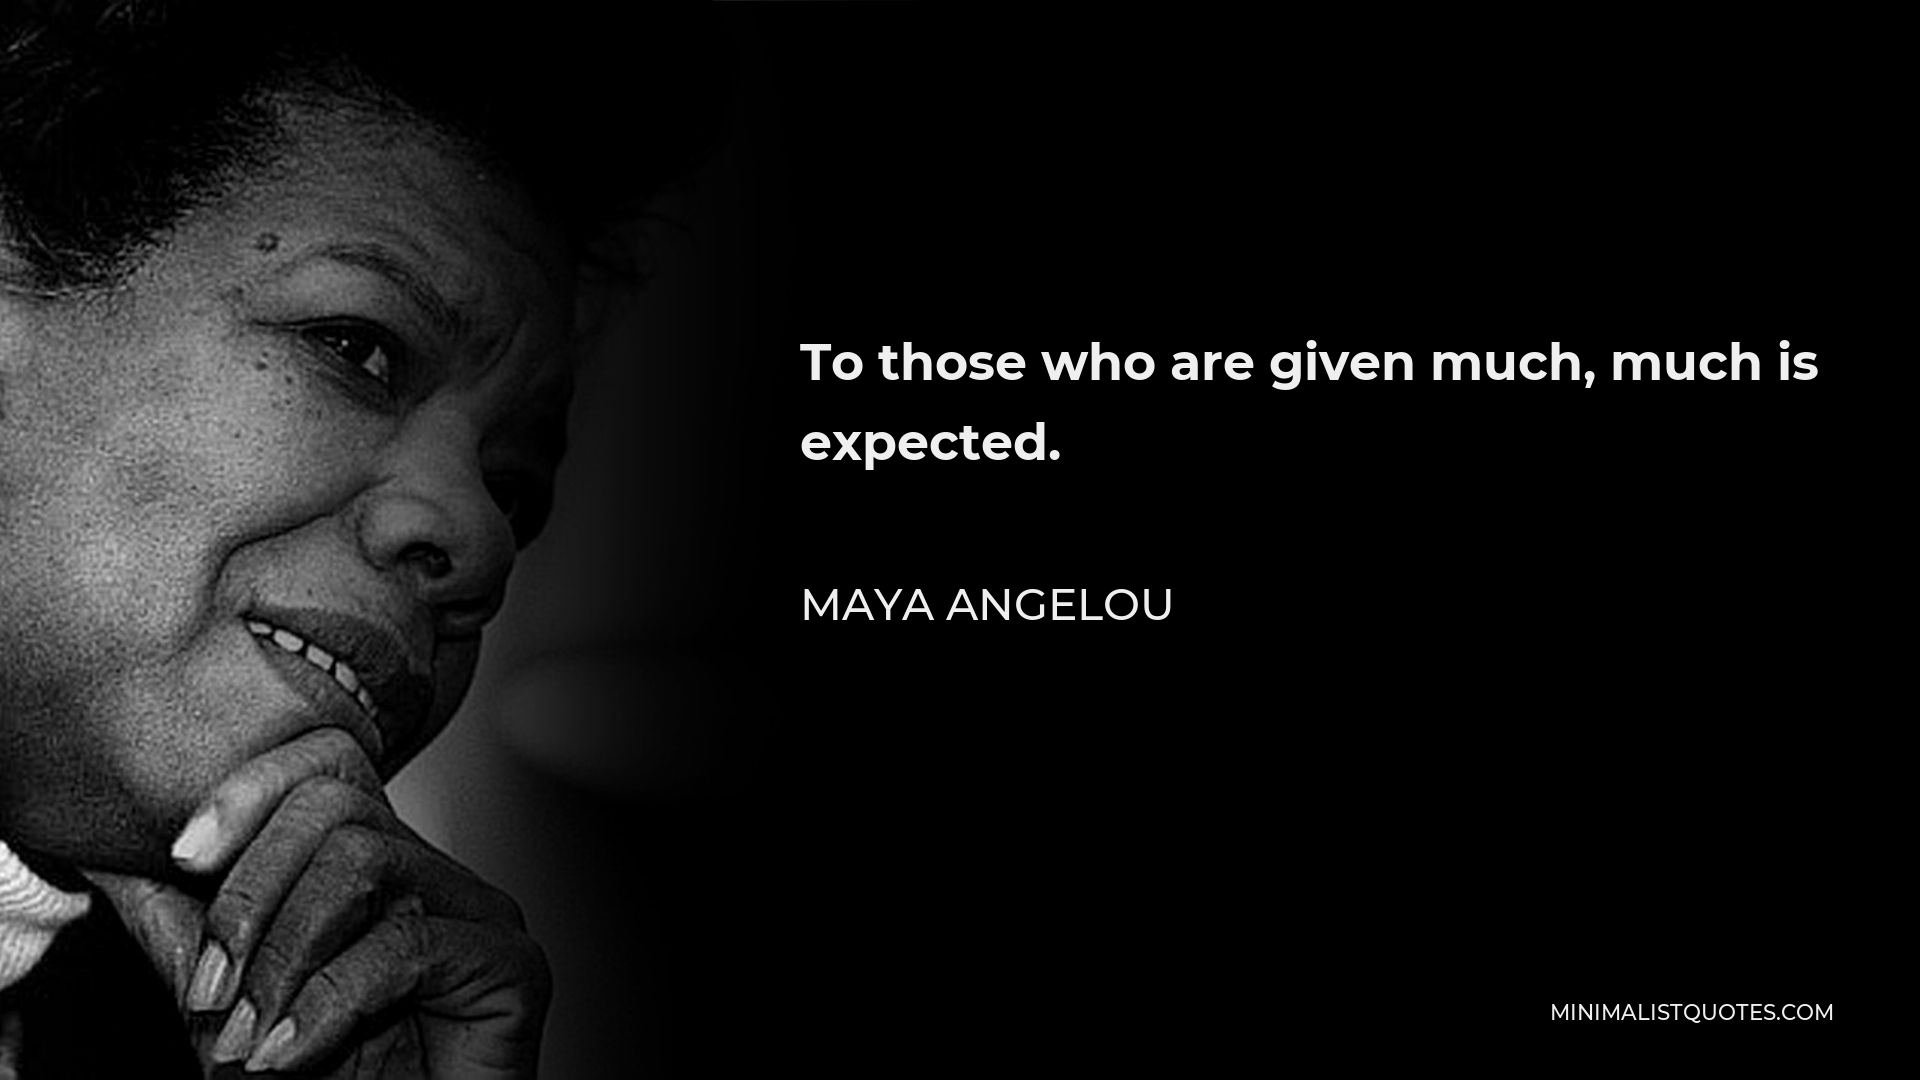 Maya Angelou Quote - To those who are given much, much is expected.